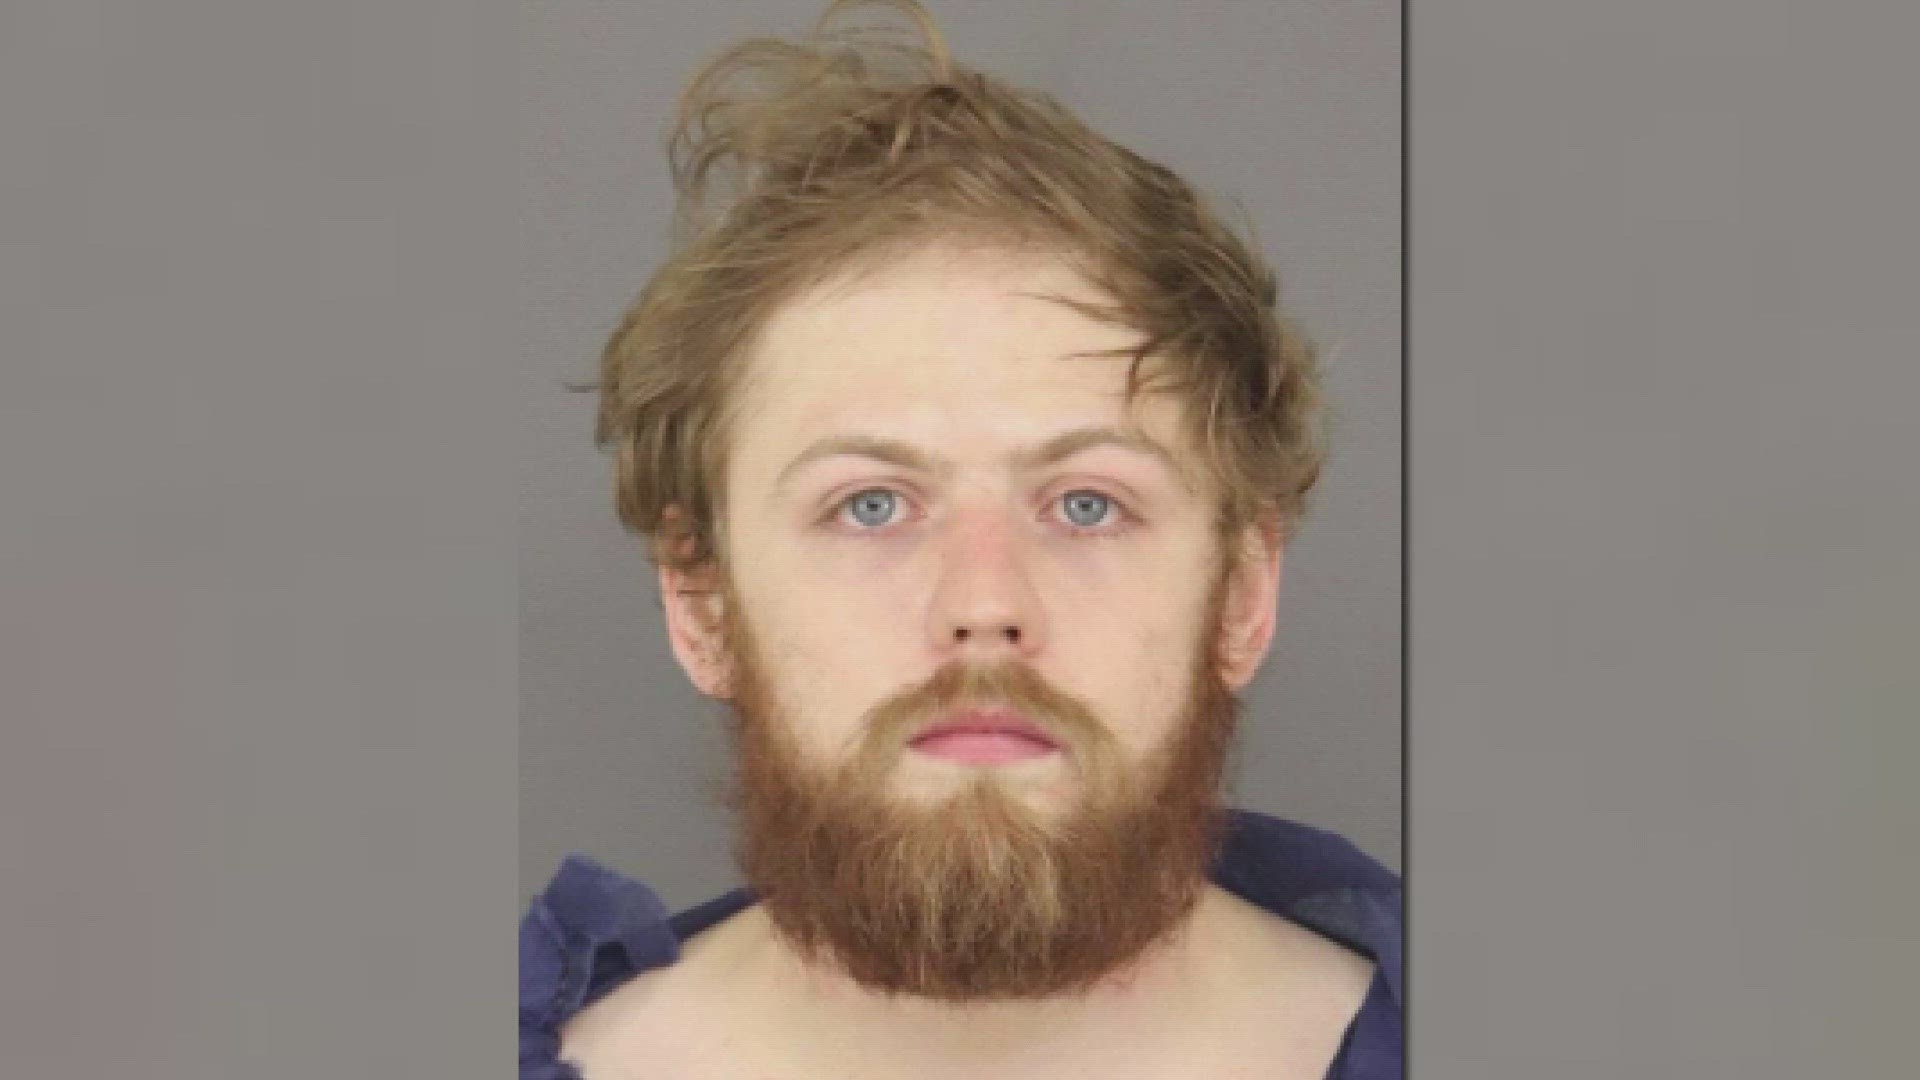 Jacob Schadler was ordered to turn himself into jail by Aug. 2 and is suspected in an Adams County murder on July 27.